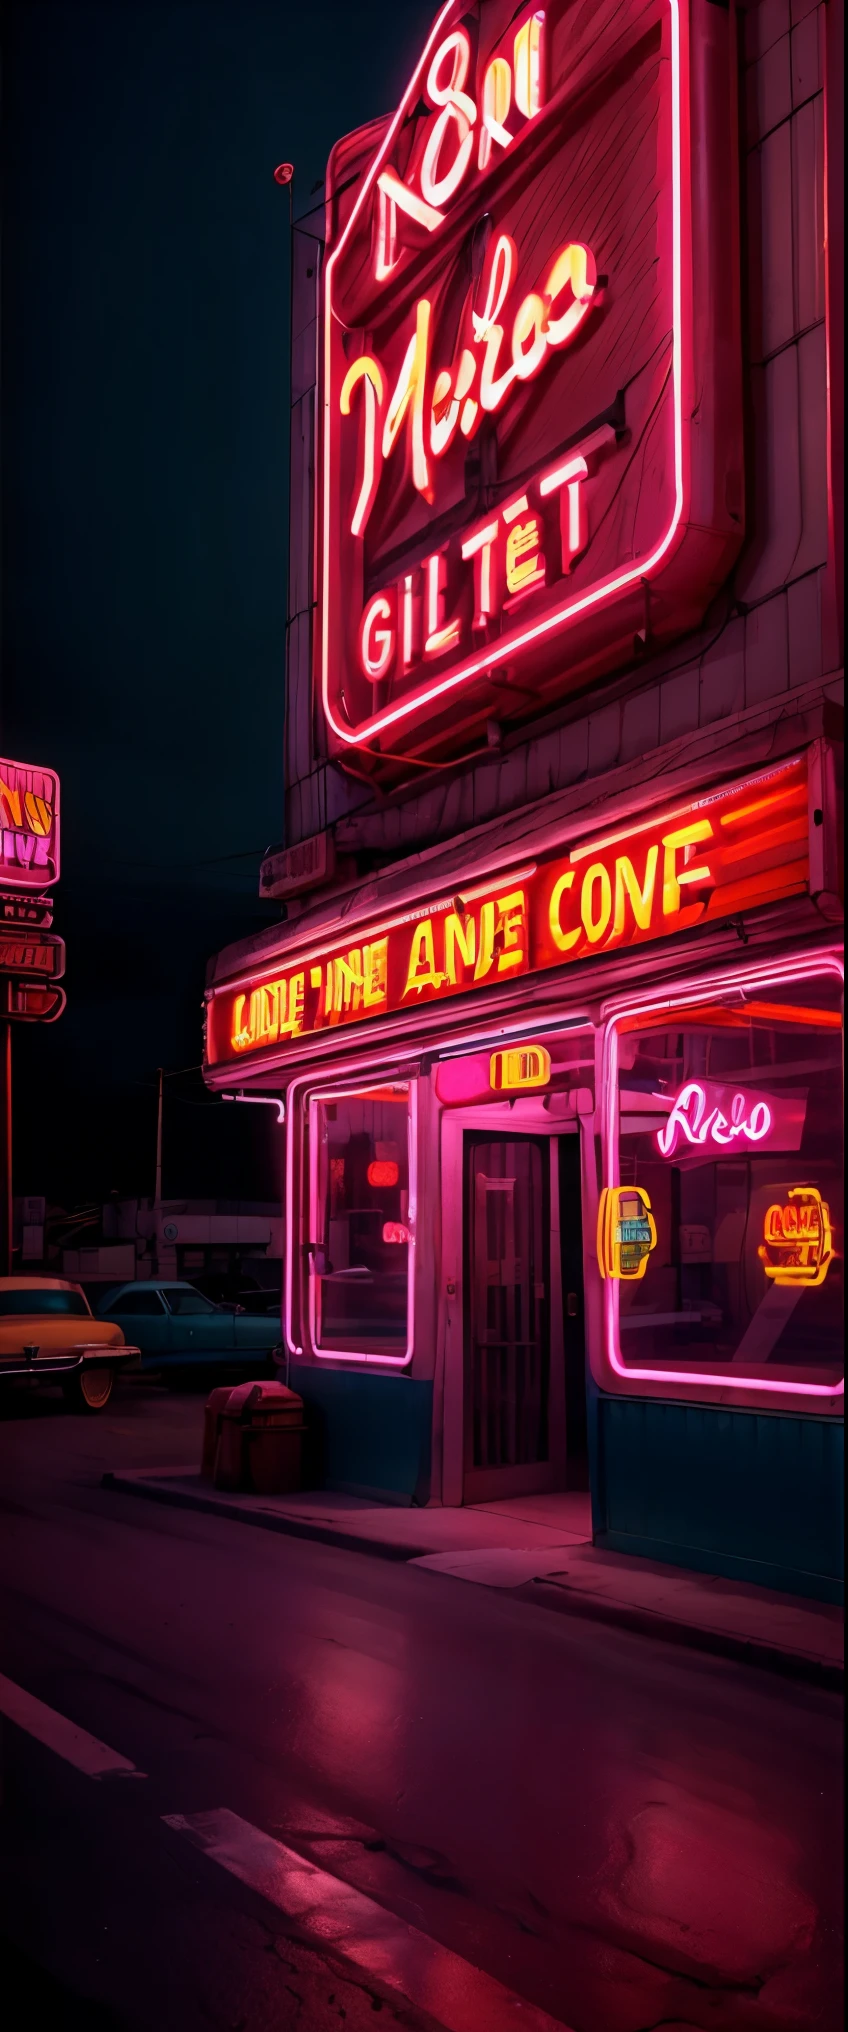 ((masterpiece, highest quality, Highest image quality, High resolution, photorealistic, Raw photo, 8K)), A pink and blue neon sign that stands out in the city at night, arafed view of a motel with a car parked in front of it, with neon signs, by Dave Melvin, route 6 6, neon signs, 1 9 5 0 s americana tourism, some have neon signs, neon lights outside, neon advertisements, gigantic neon signs, neon shops, by Arnie Swekel, few neon signs, neon signs in background, 